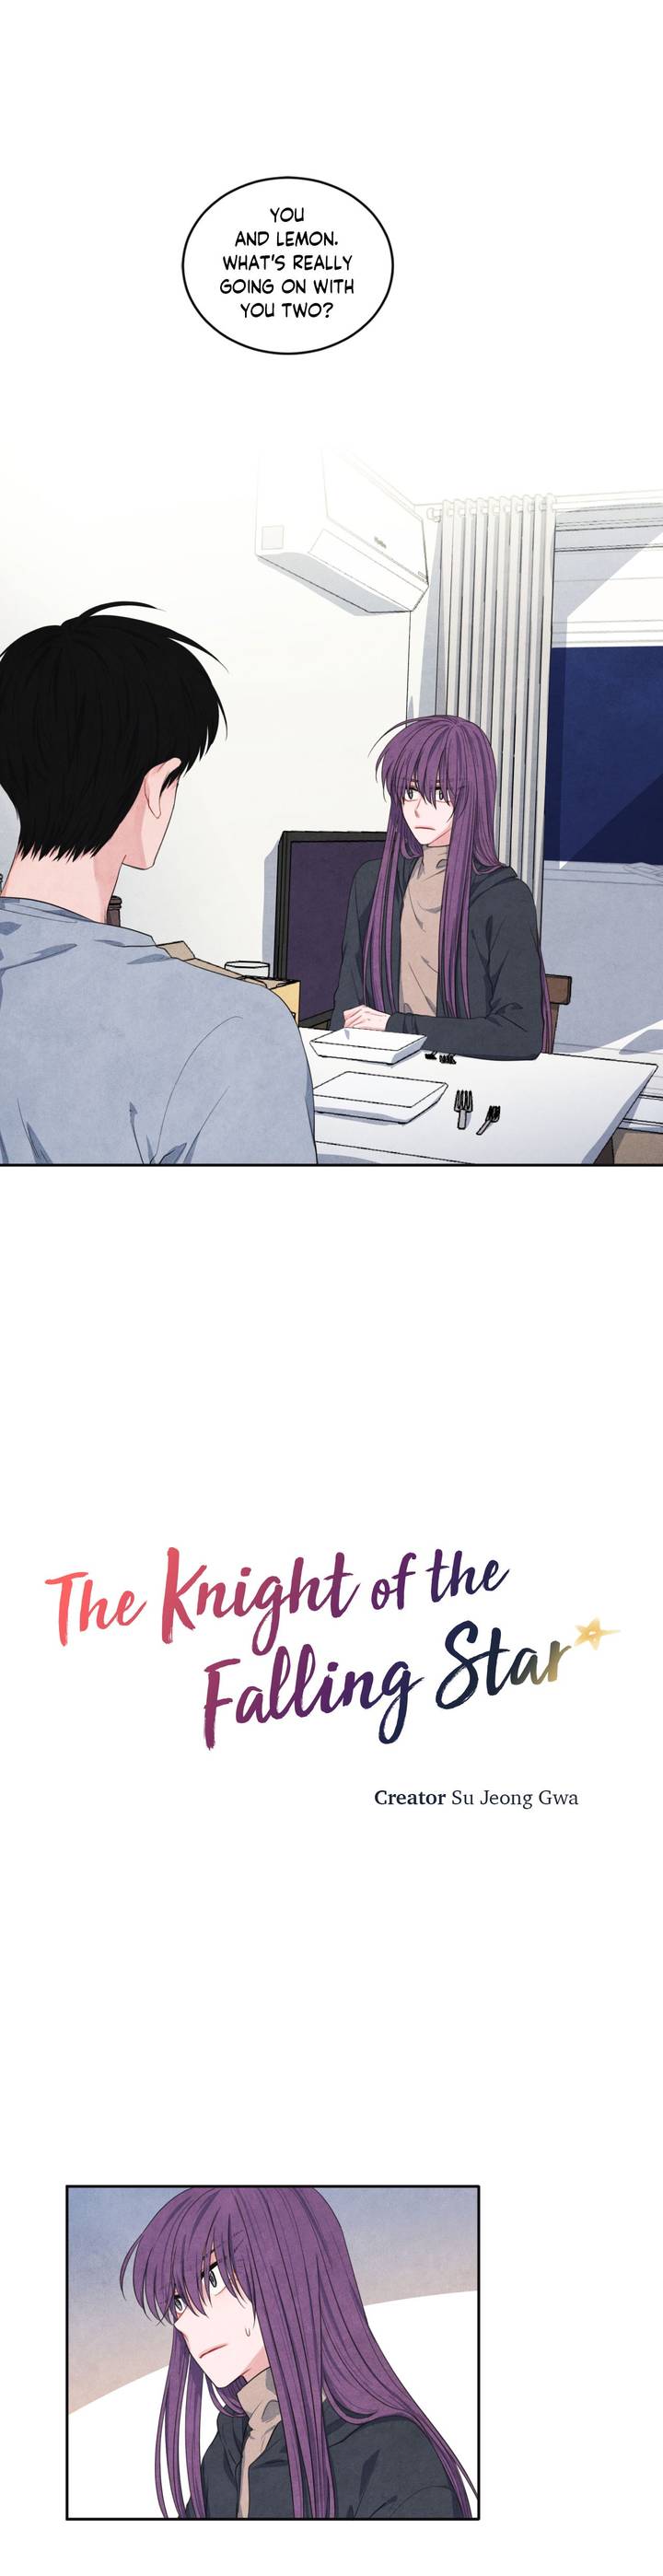 The Knight Of The Falling Star - Page 1